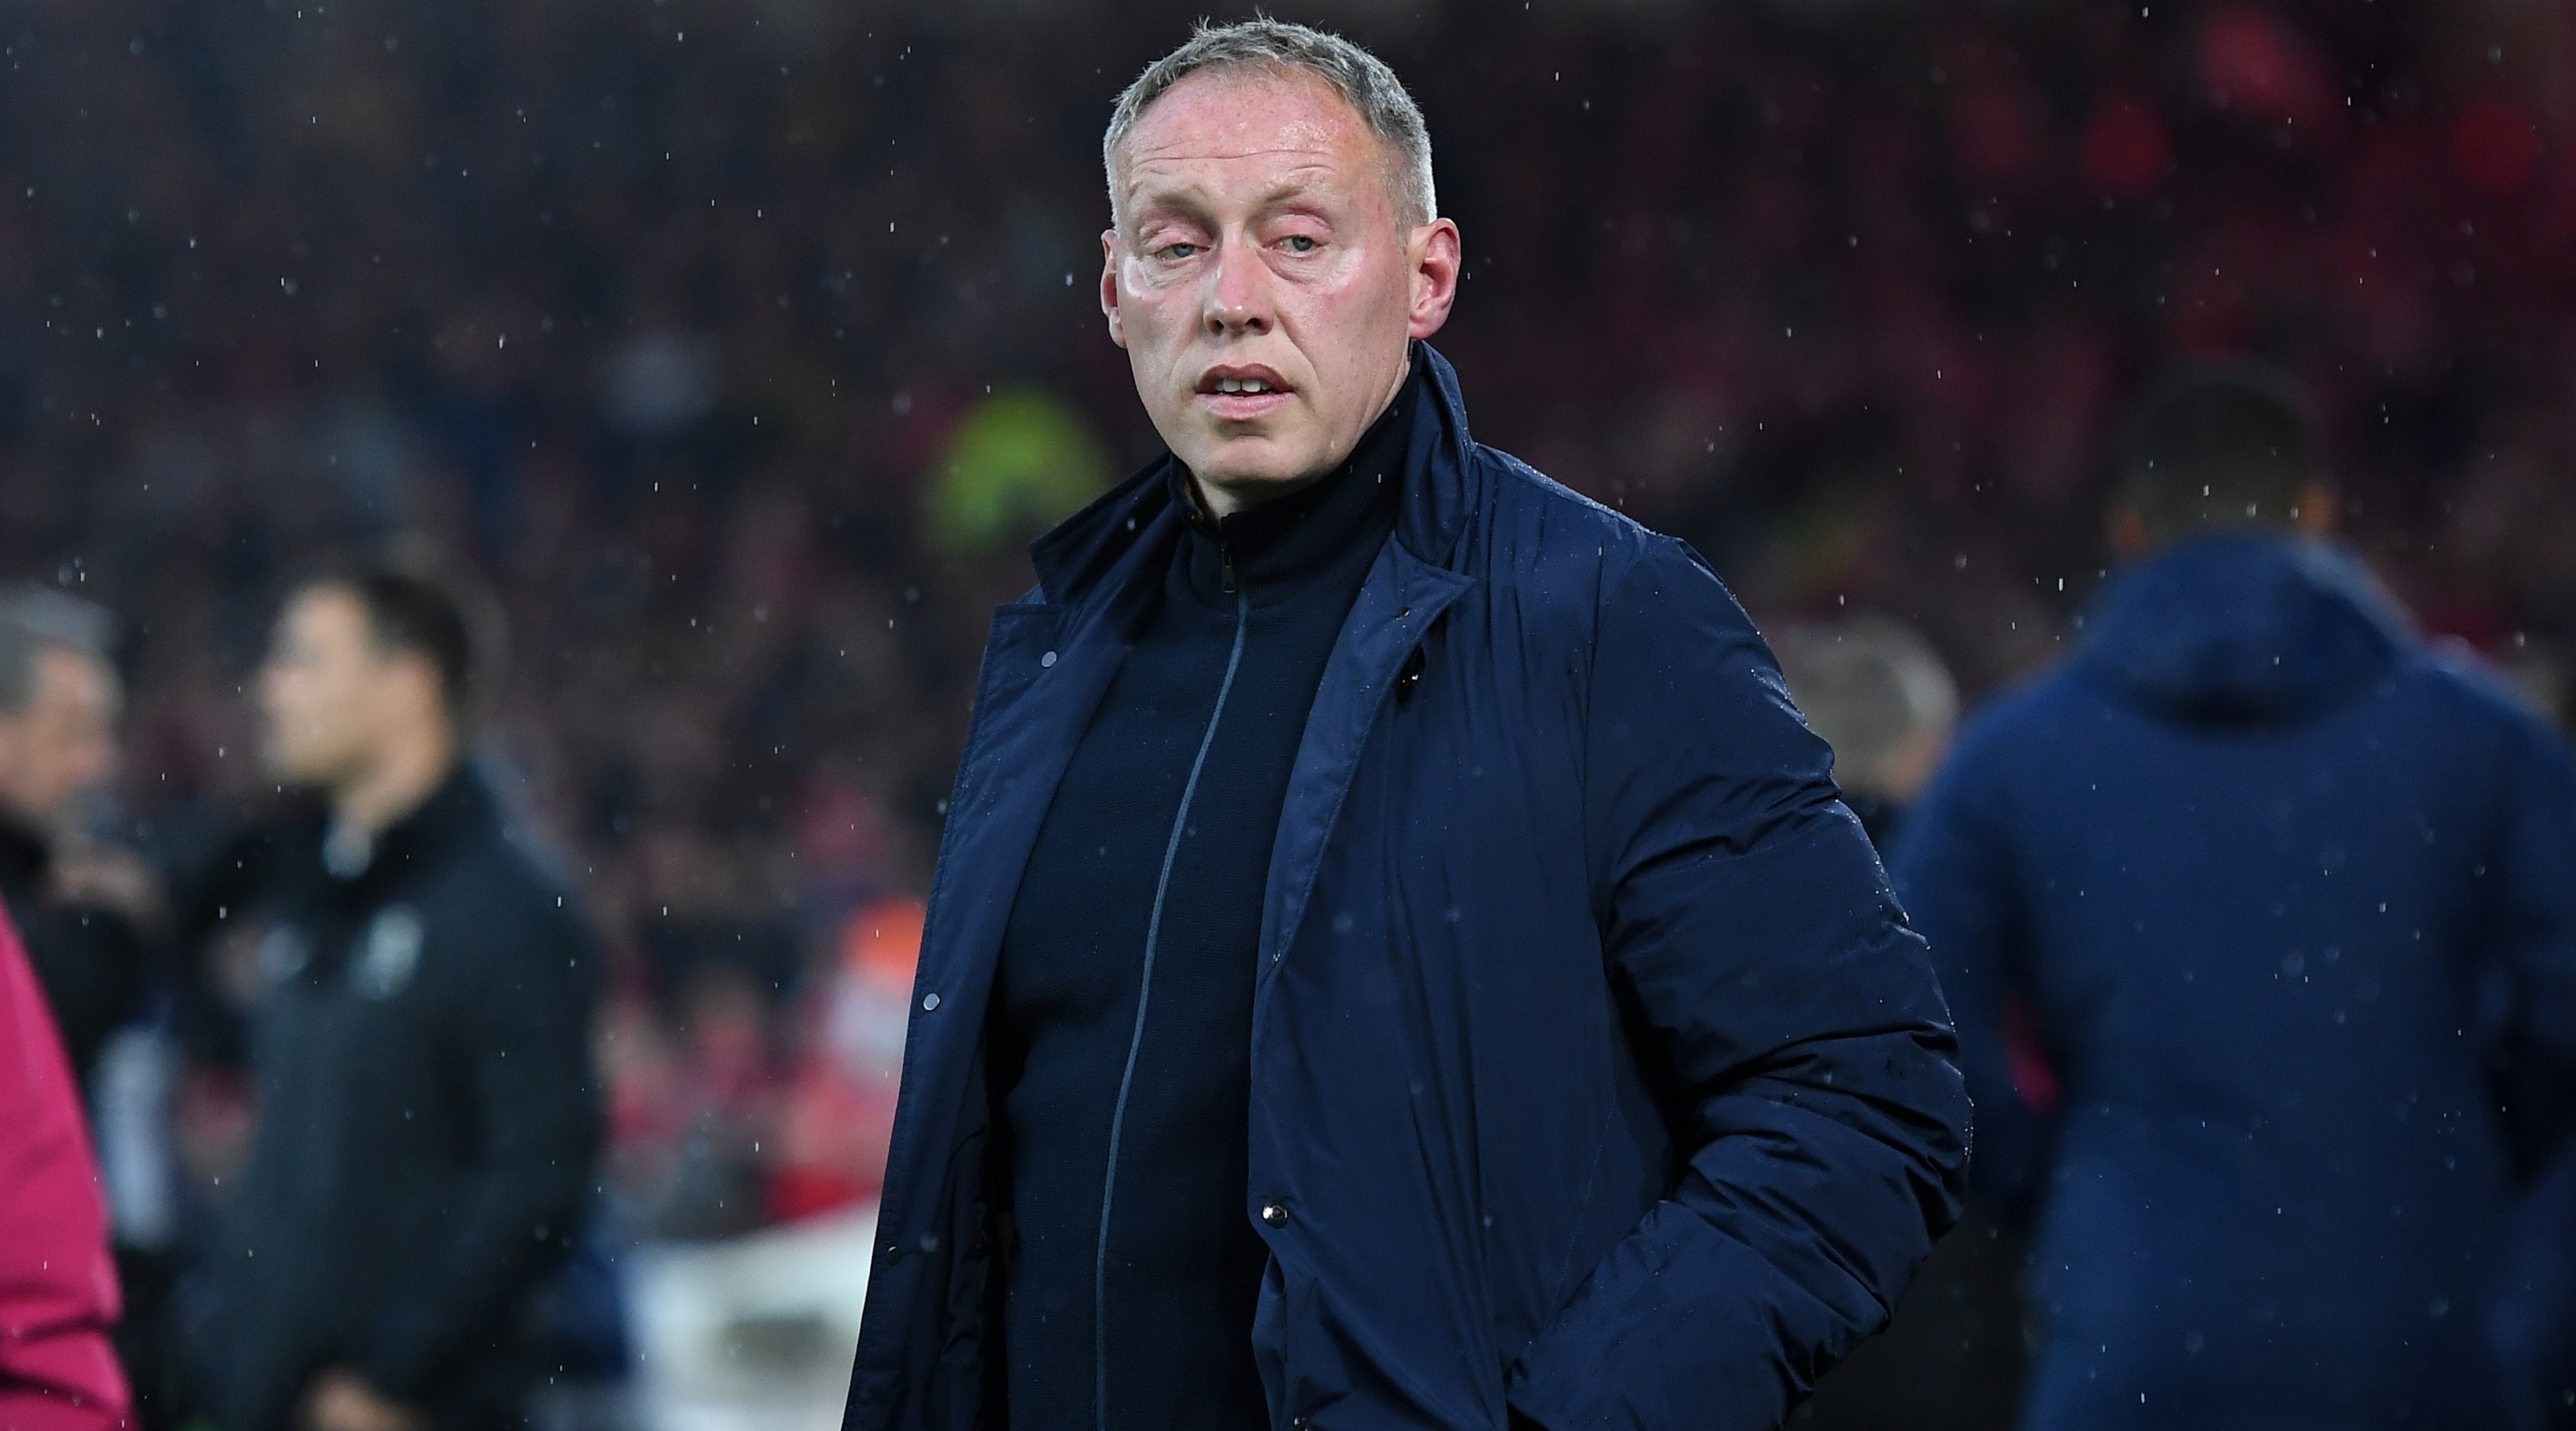 Nottingham Forest head coach Steve Cooper looks on during the Premier League match between Nottingham Forest and Southampton at the City Ground on May 8, 2023 in Nottingham, England.